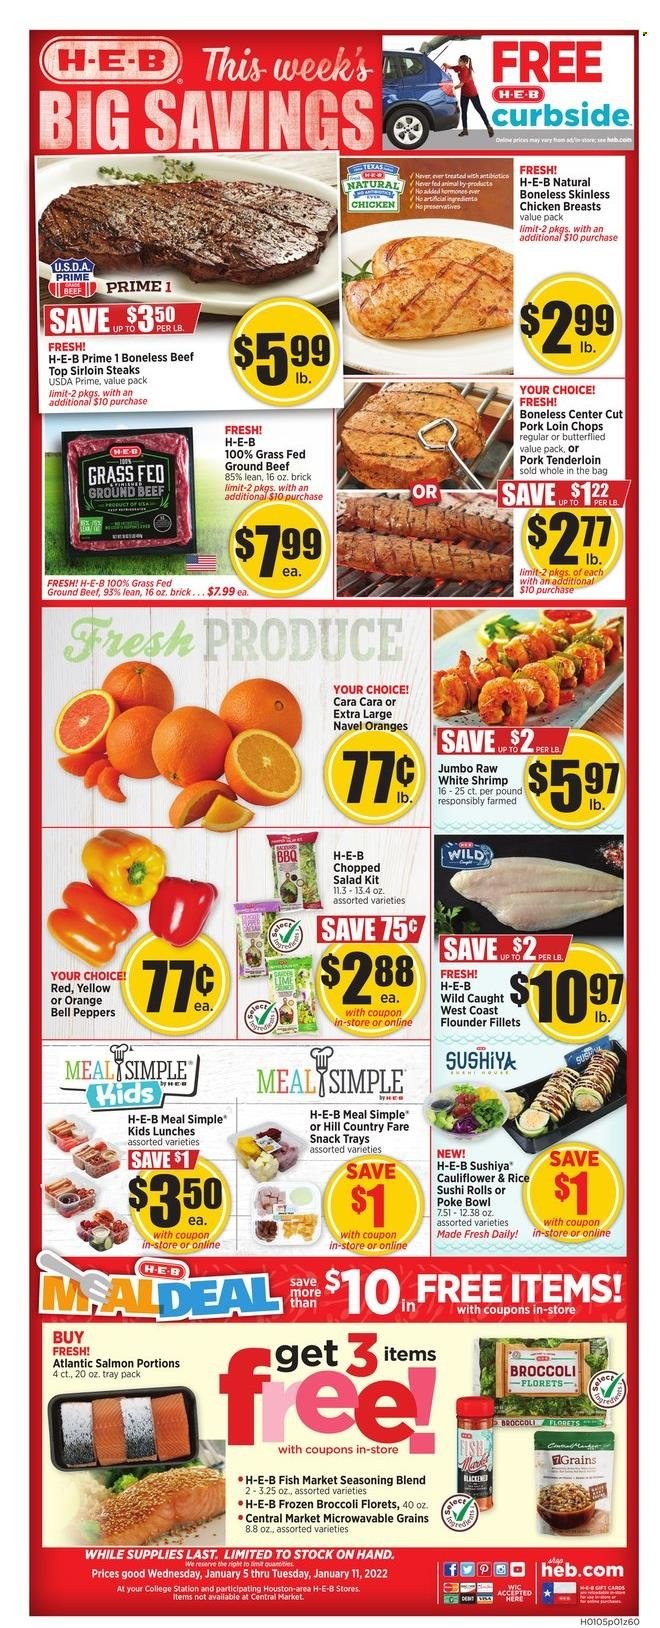 thumbnail - H-E-B Flyer - 01/05/2022 - 01/11/2022 - Sales products - bell peppers, broccoli, salad, peppers, chopped salad, oranges, flounder, salmon, shrimps, snack, rice, spice, chicken breasts, beef meat, ground beef, steak, sirloin steak, pork chops, pork loin, pork meat, pork tenderloin, bowl, navel oranges. Page 1.